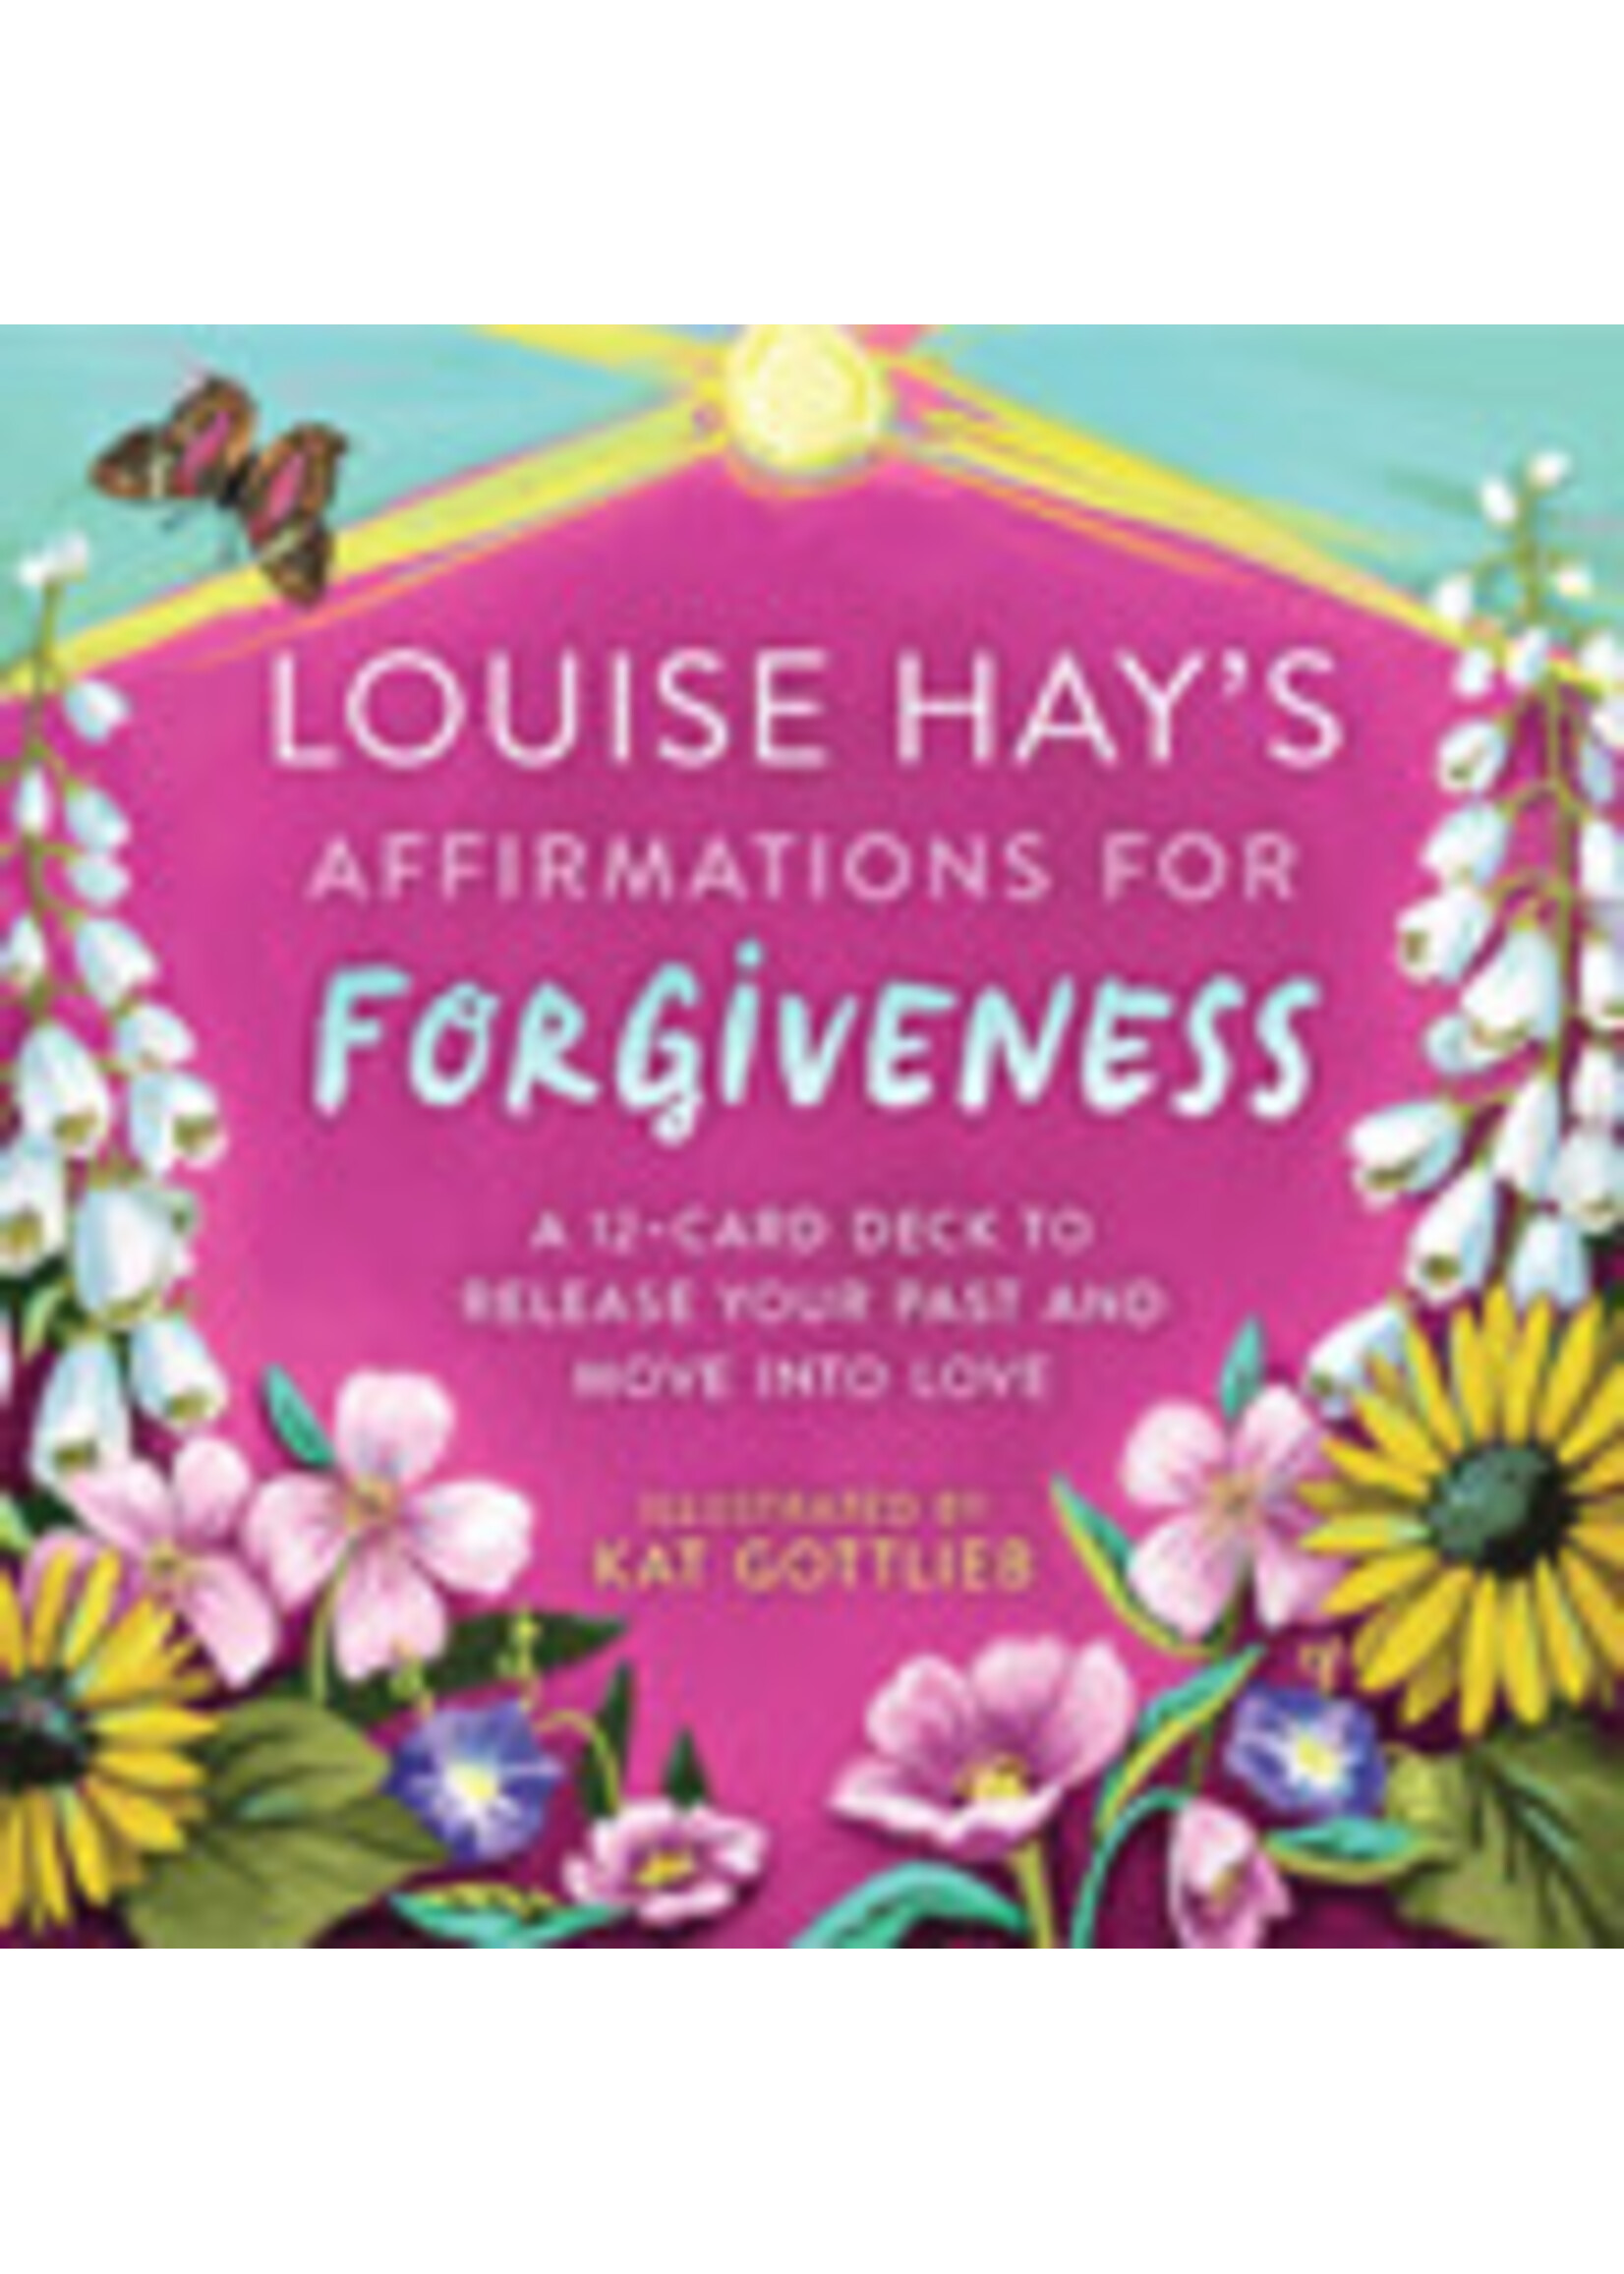 Louise Hay's Affirmations for Forgiveness